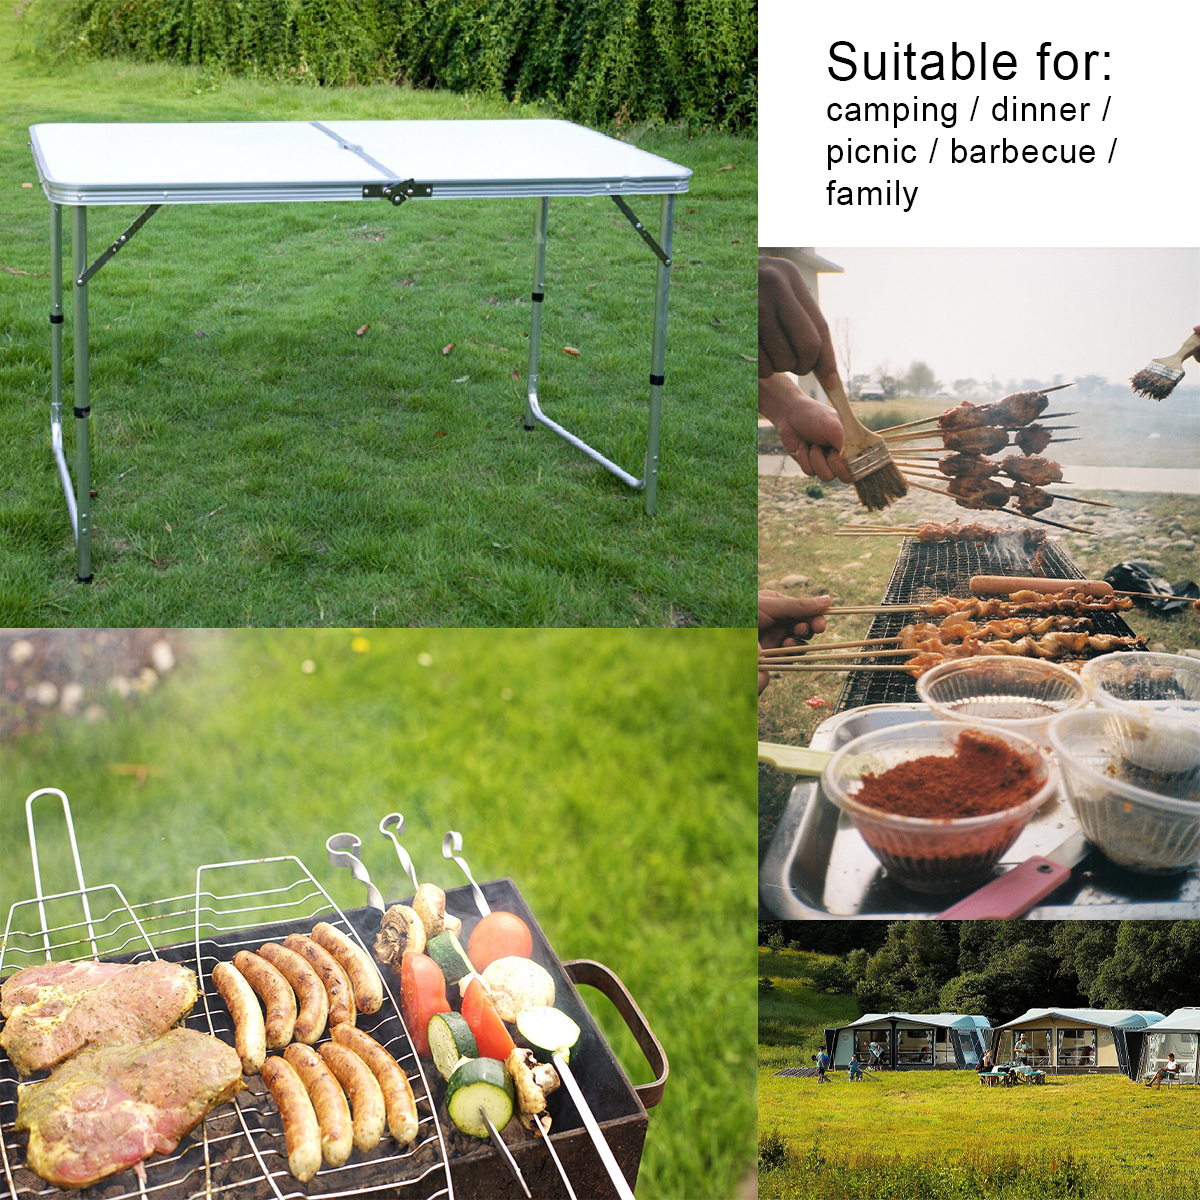 Folding Table 4ft Aluminum Camping Table Chair Set, Portable Picnic Card Table, Three Heights Adjustable Legs-47.24''x23.62'' - image 5 of 10